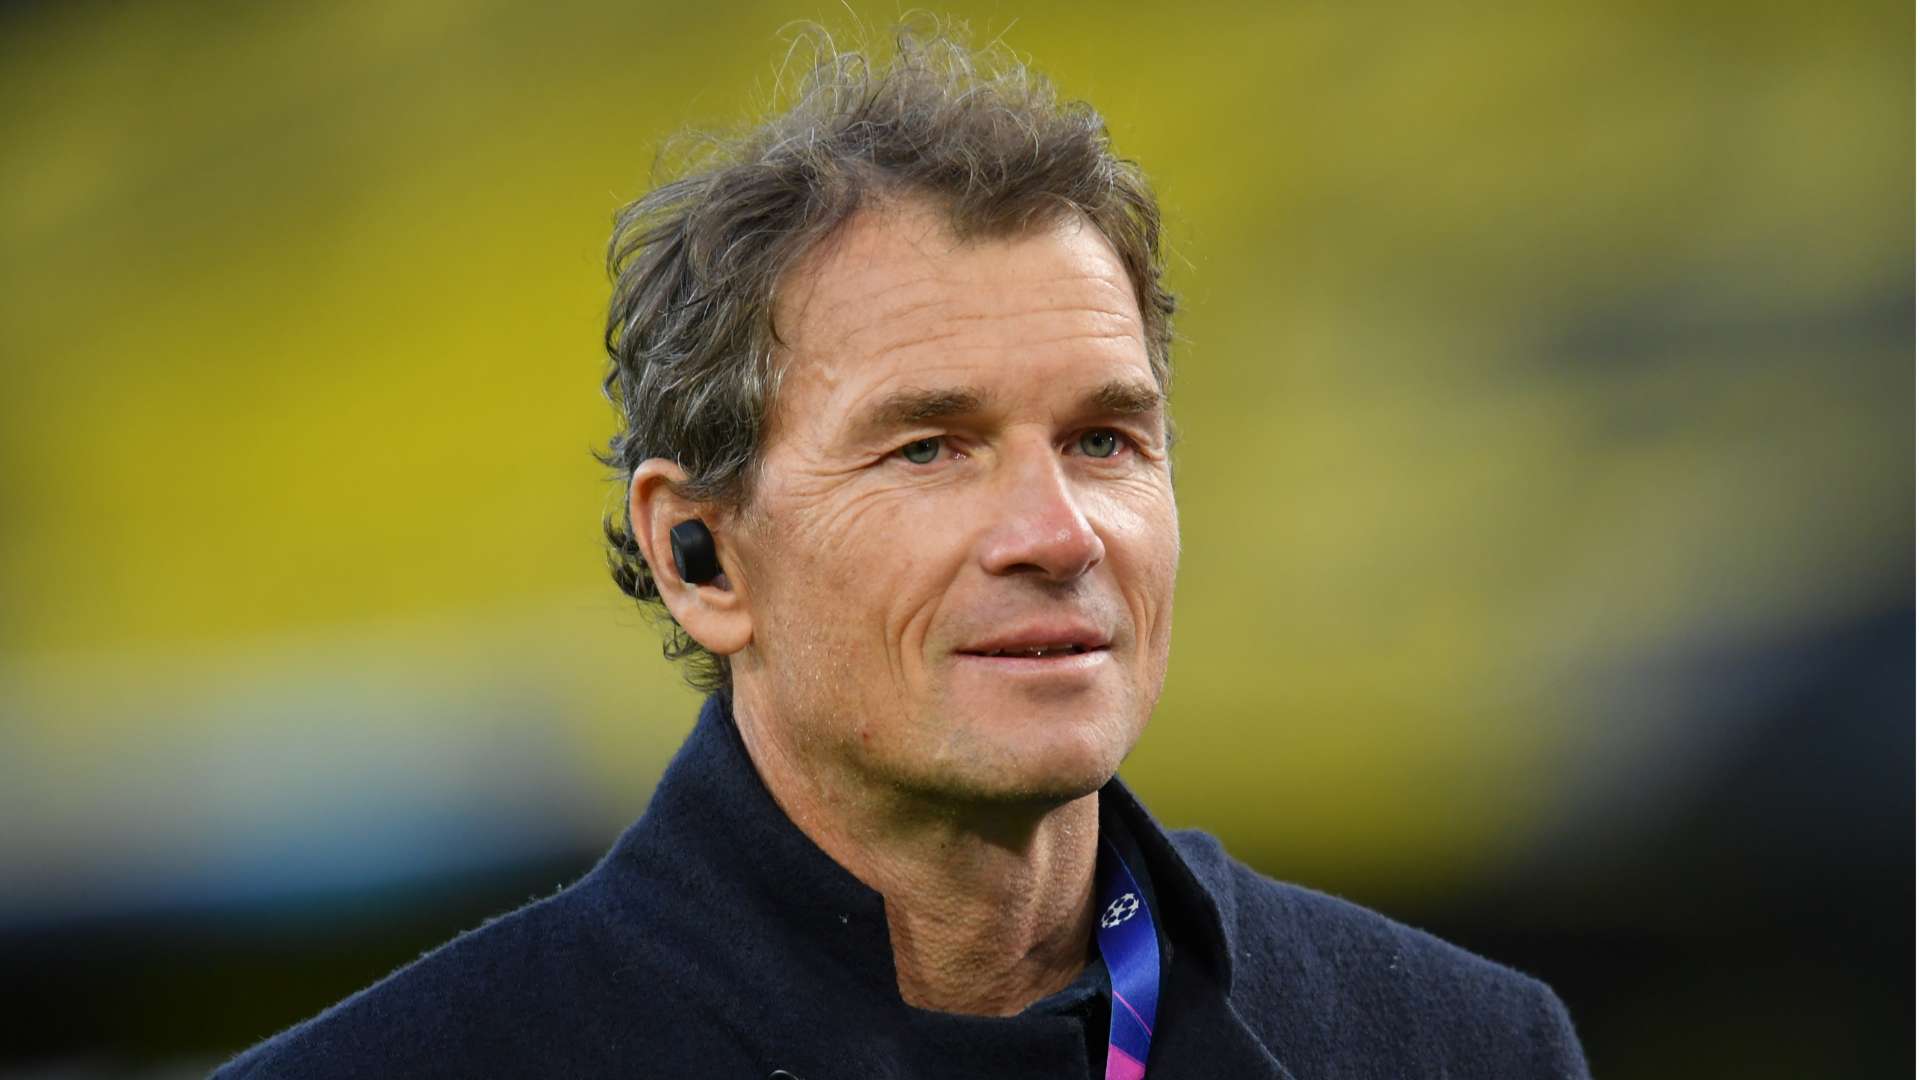 Former Arsenal goalkeeper Jens Lehmann was fined after a chainsaw incident